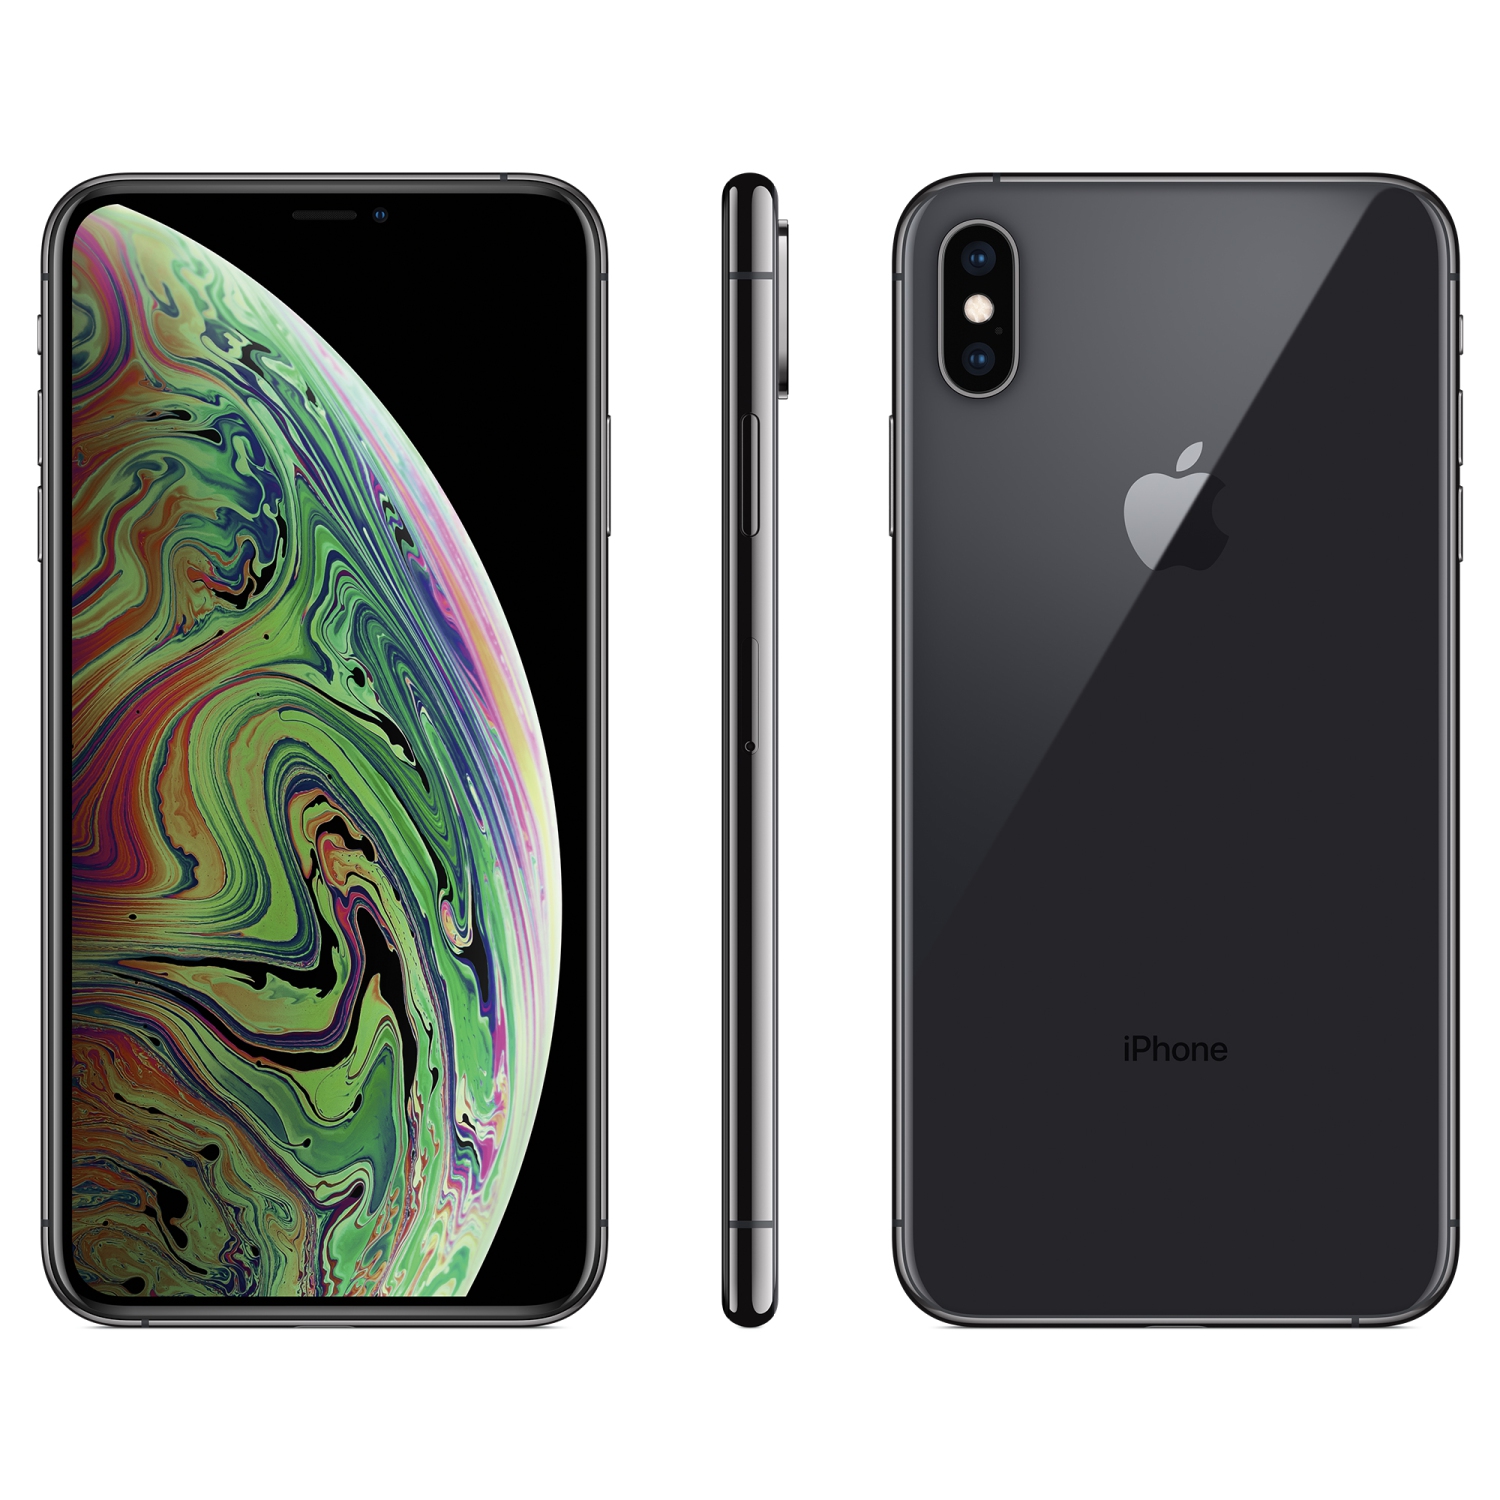 Refurbished (Excellent) - Apple iPhone XS Max 64GB Smartphone - Space Grey - Unlocked - Certified Refurbished